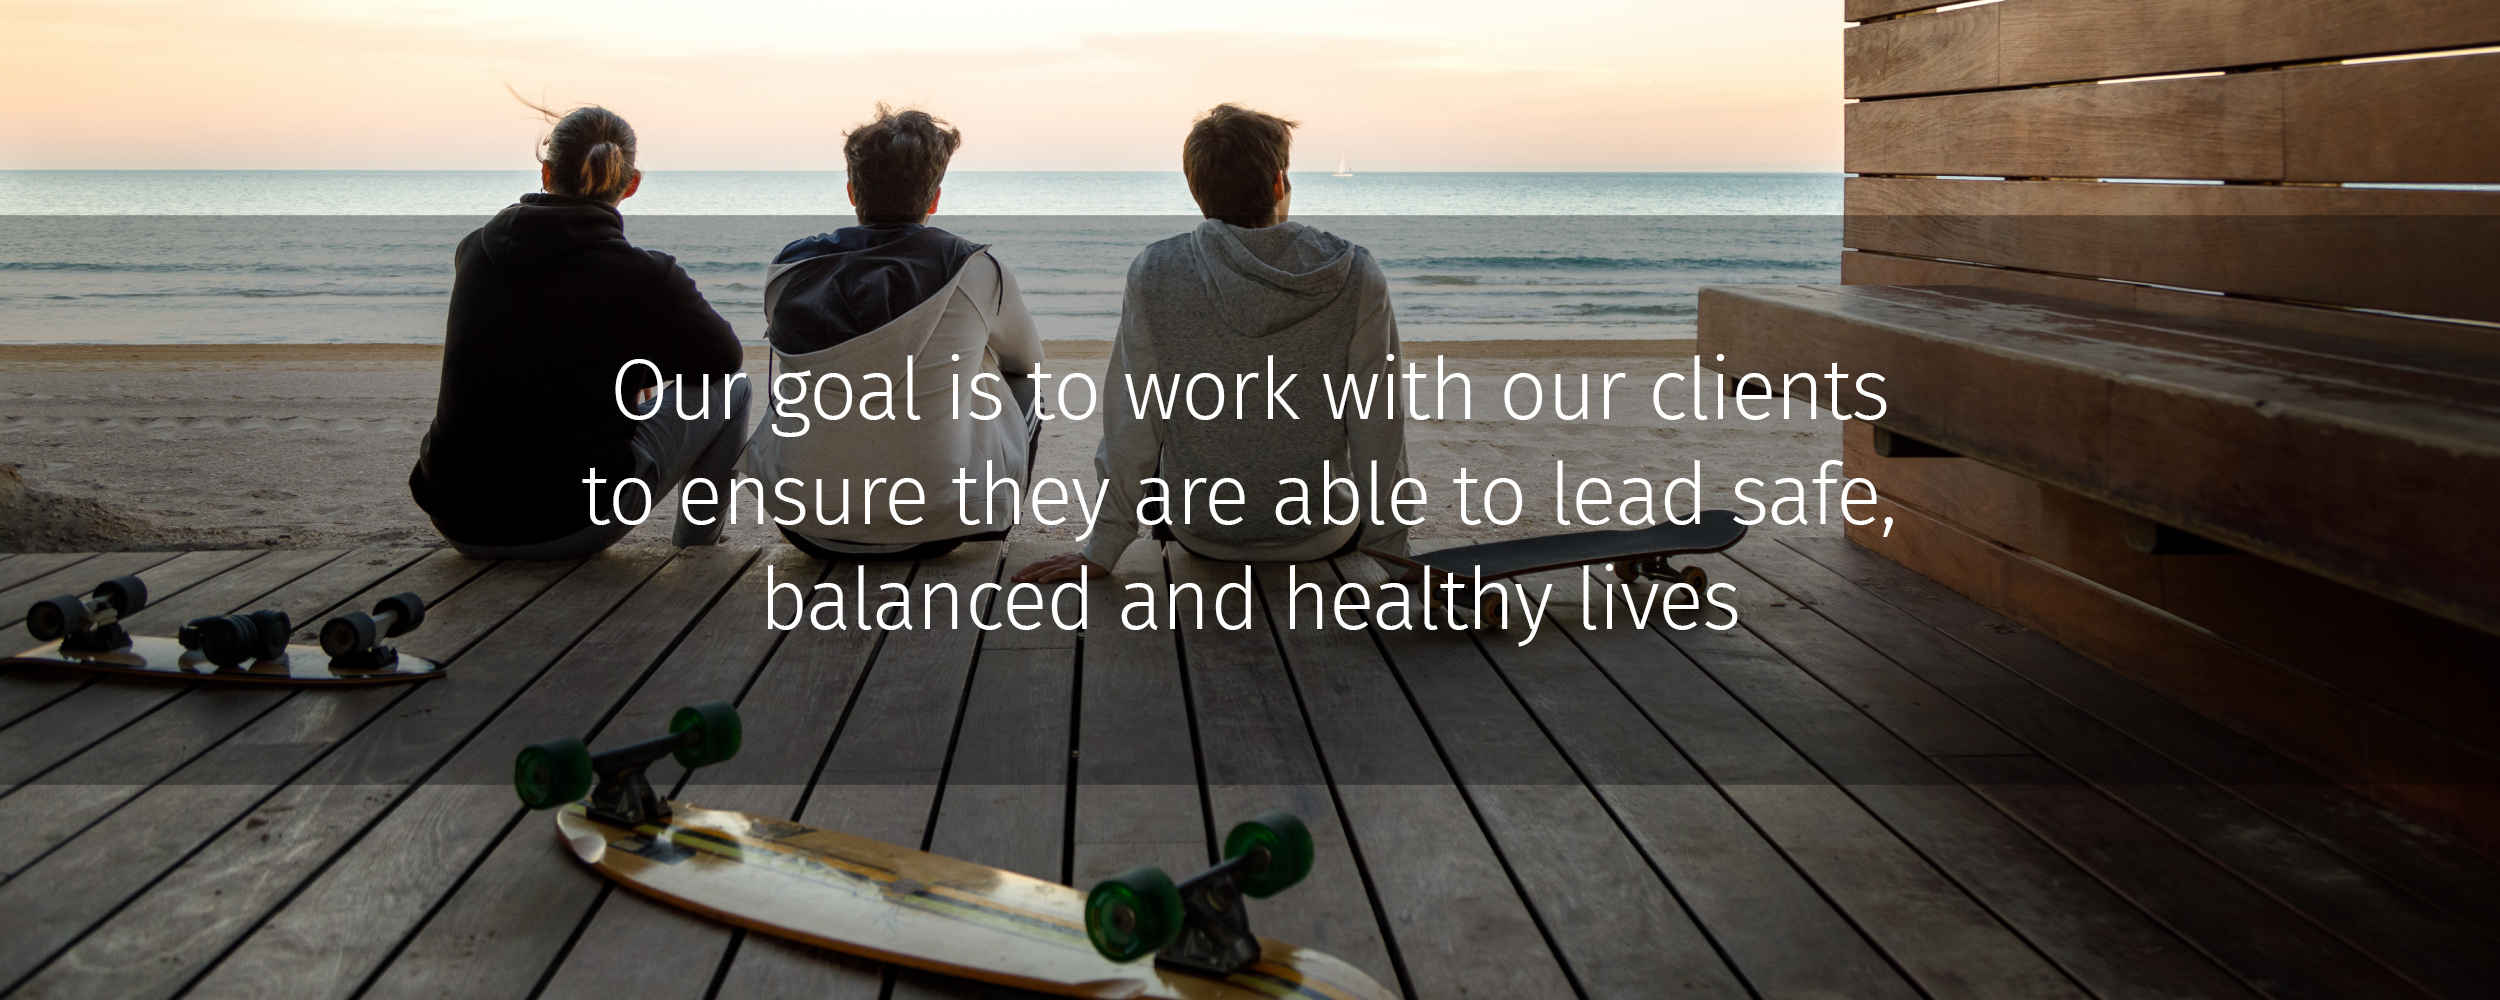 Our goal is to work with our clients to ensure they are able to lead safe, balanced and healthy lives